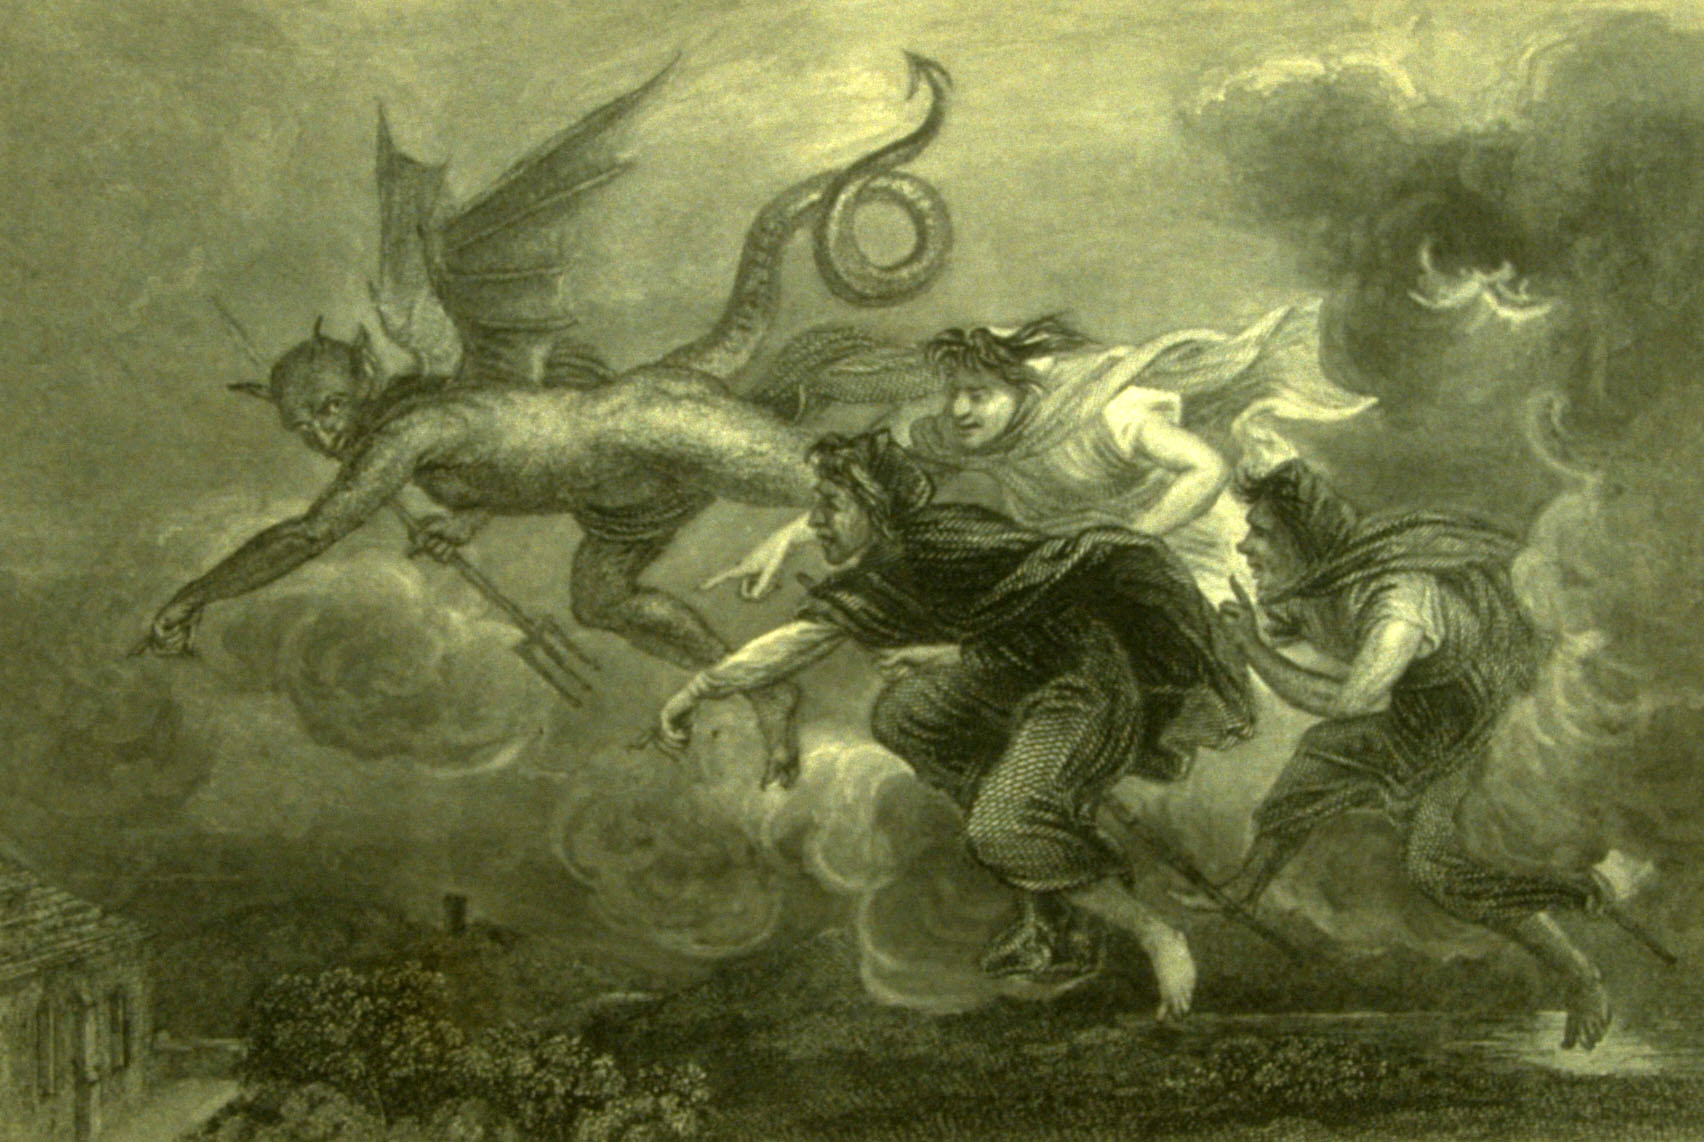 Engraving that shows a scene from Burns'poem' Address to the devil'. The devil is followed by three people. 